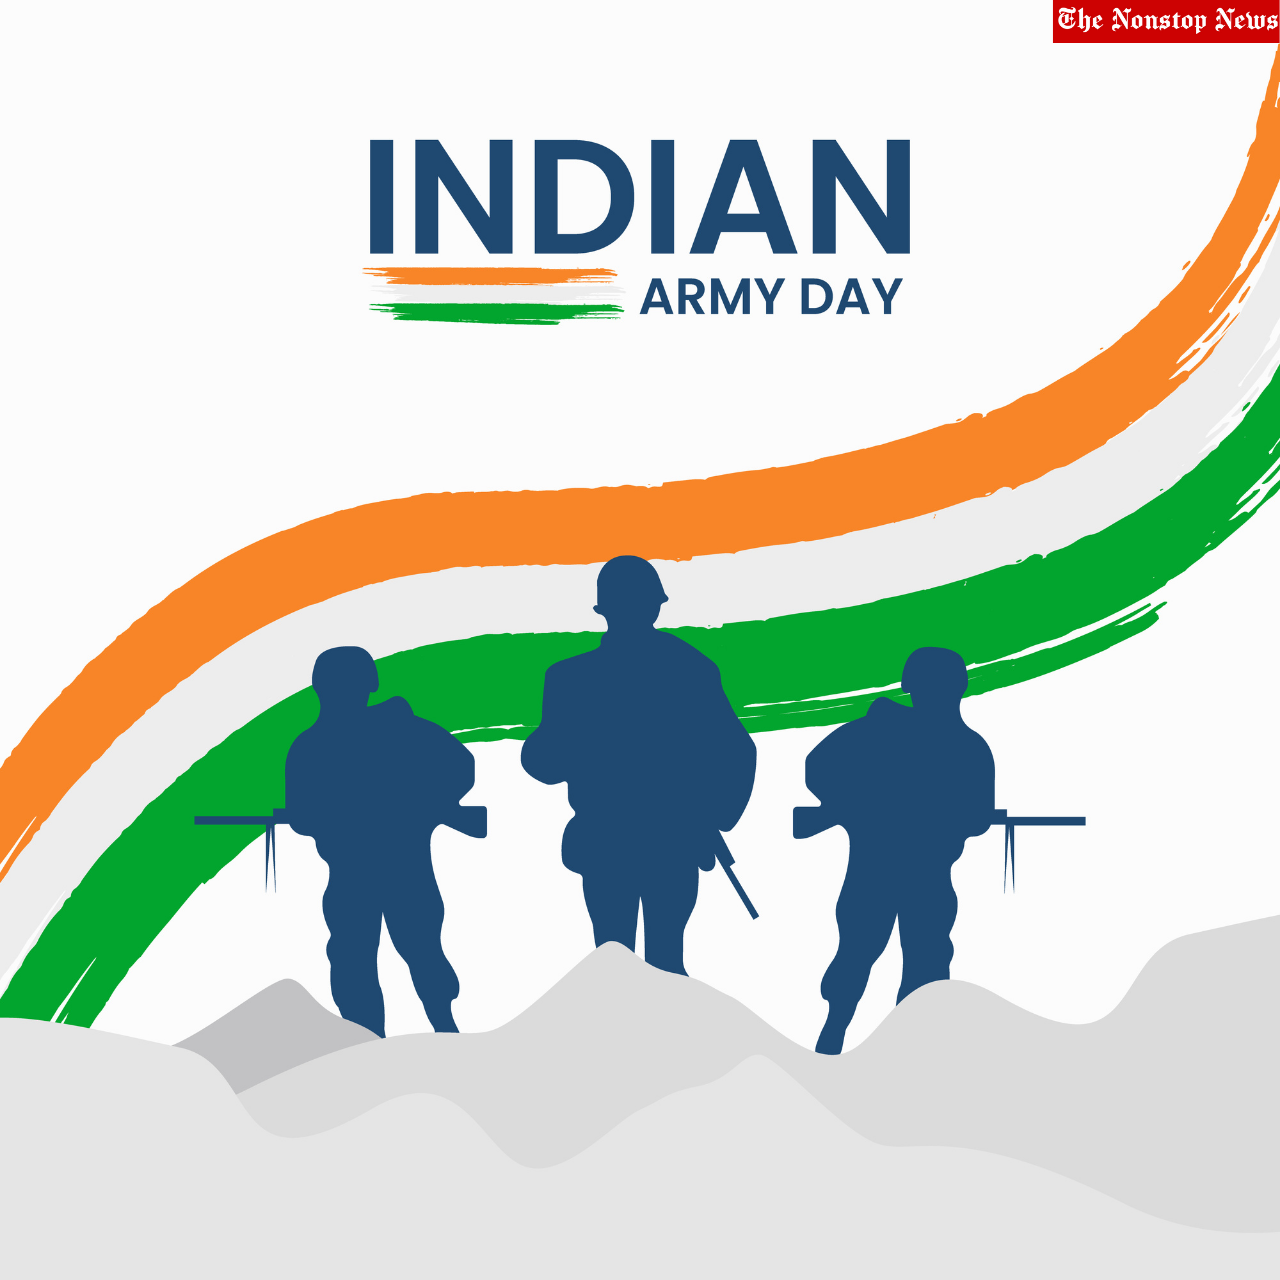 Indian Army Day 2022 HD Wallpapers, Posters, Banners, WhatsApp DP, Drawings to Download